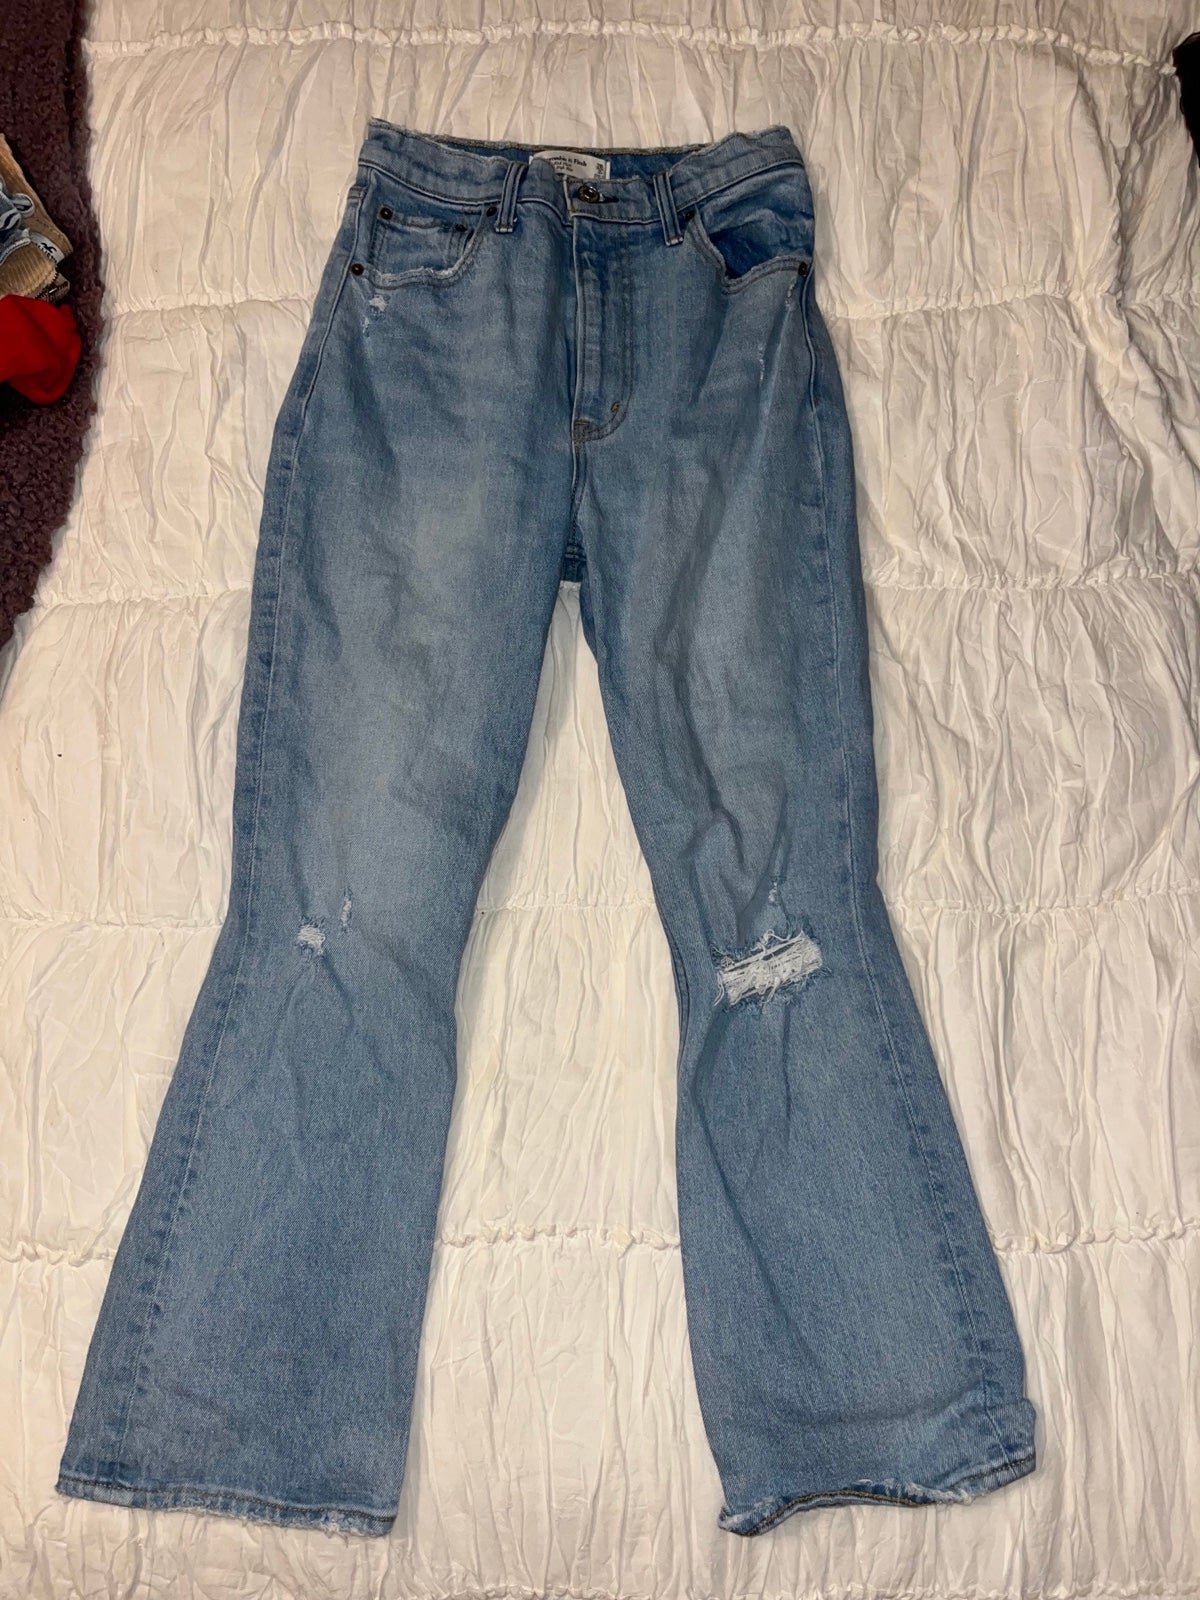 Buy Abercrombie Jeans FstaGVOd6 Store Online